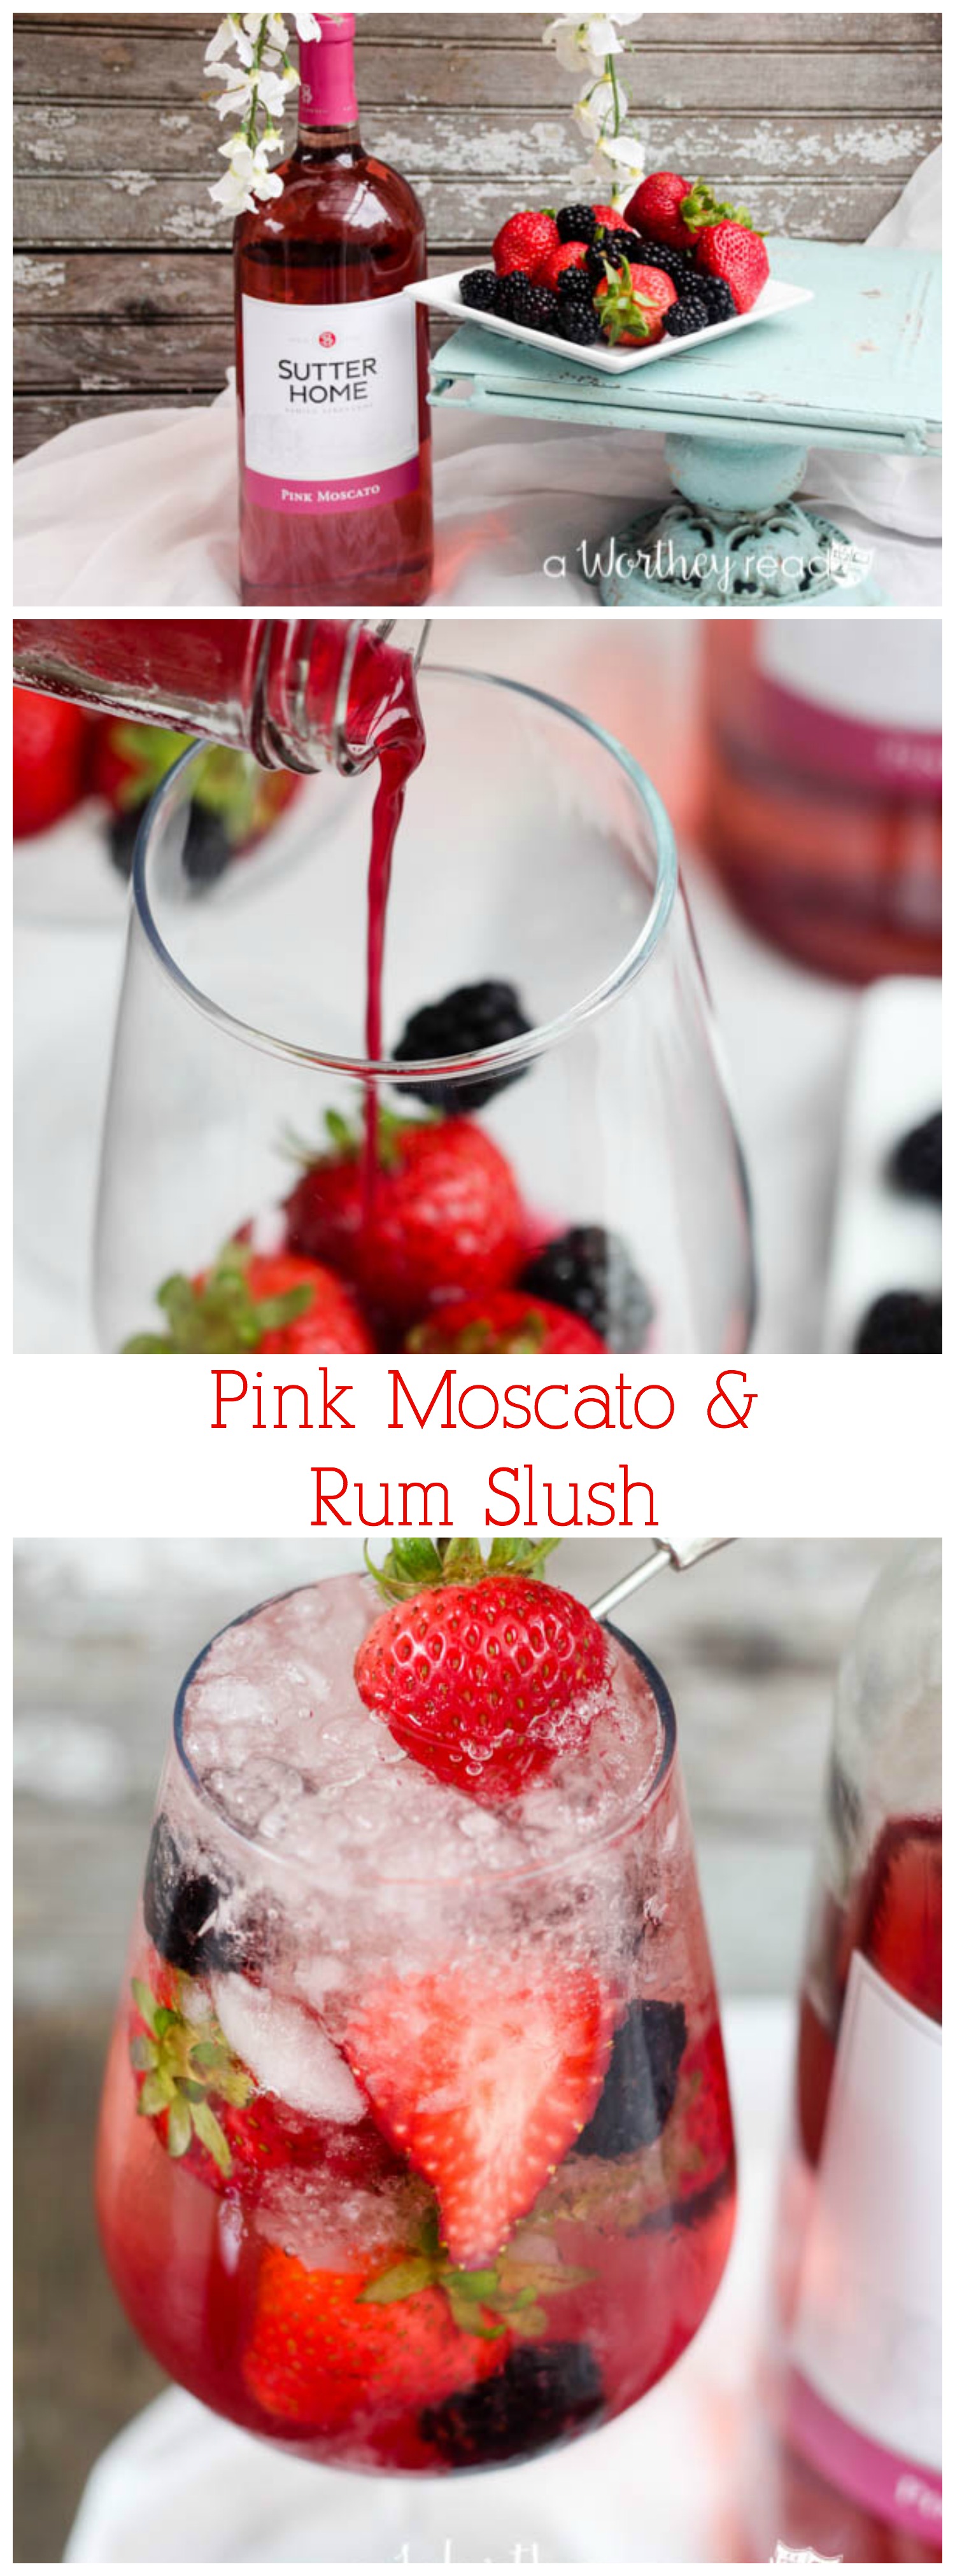 Summer time entertaining with a Pink Moscato & Rum Berry Slush